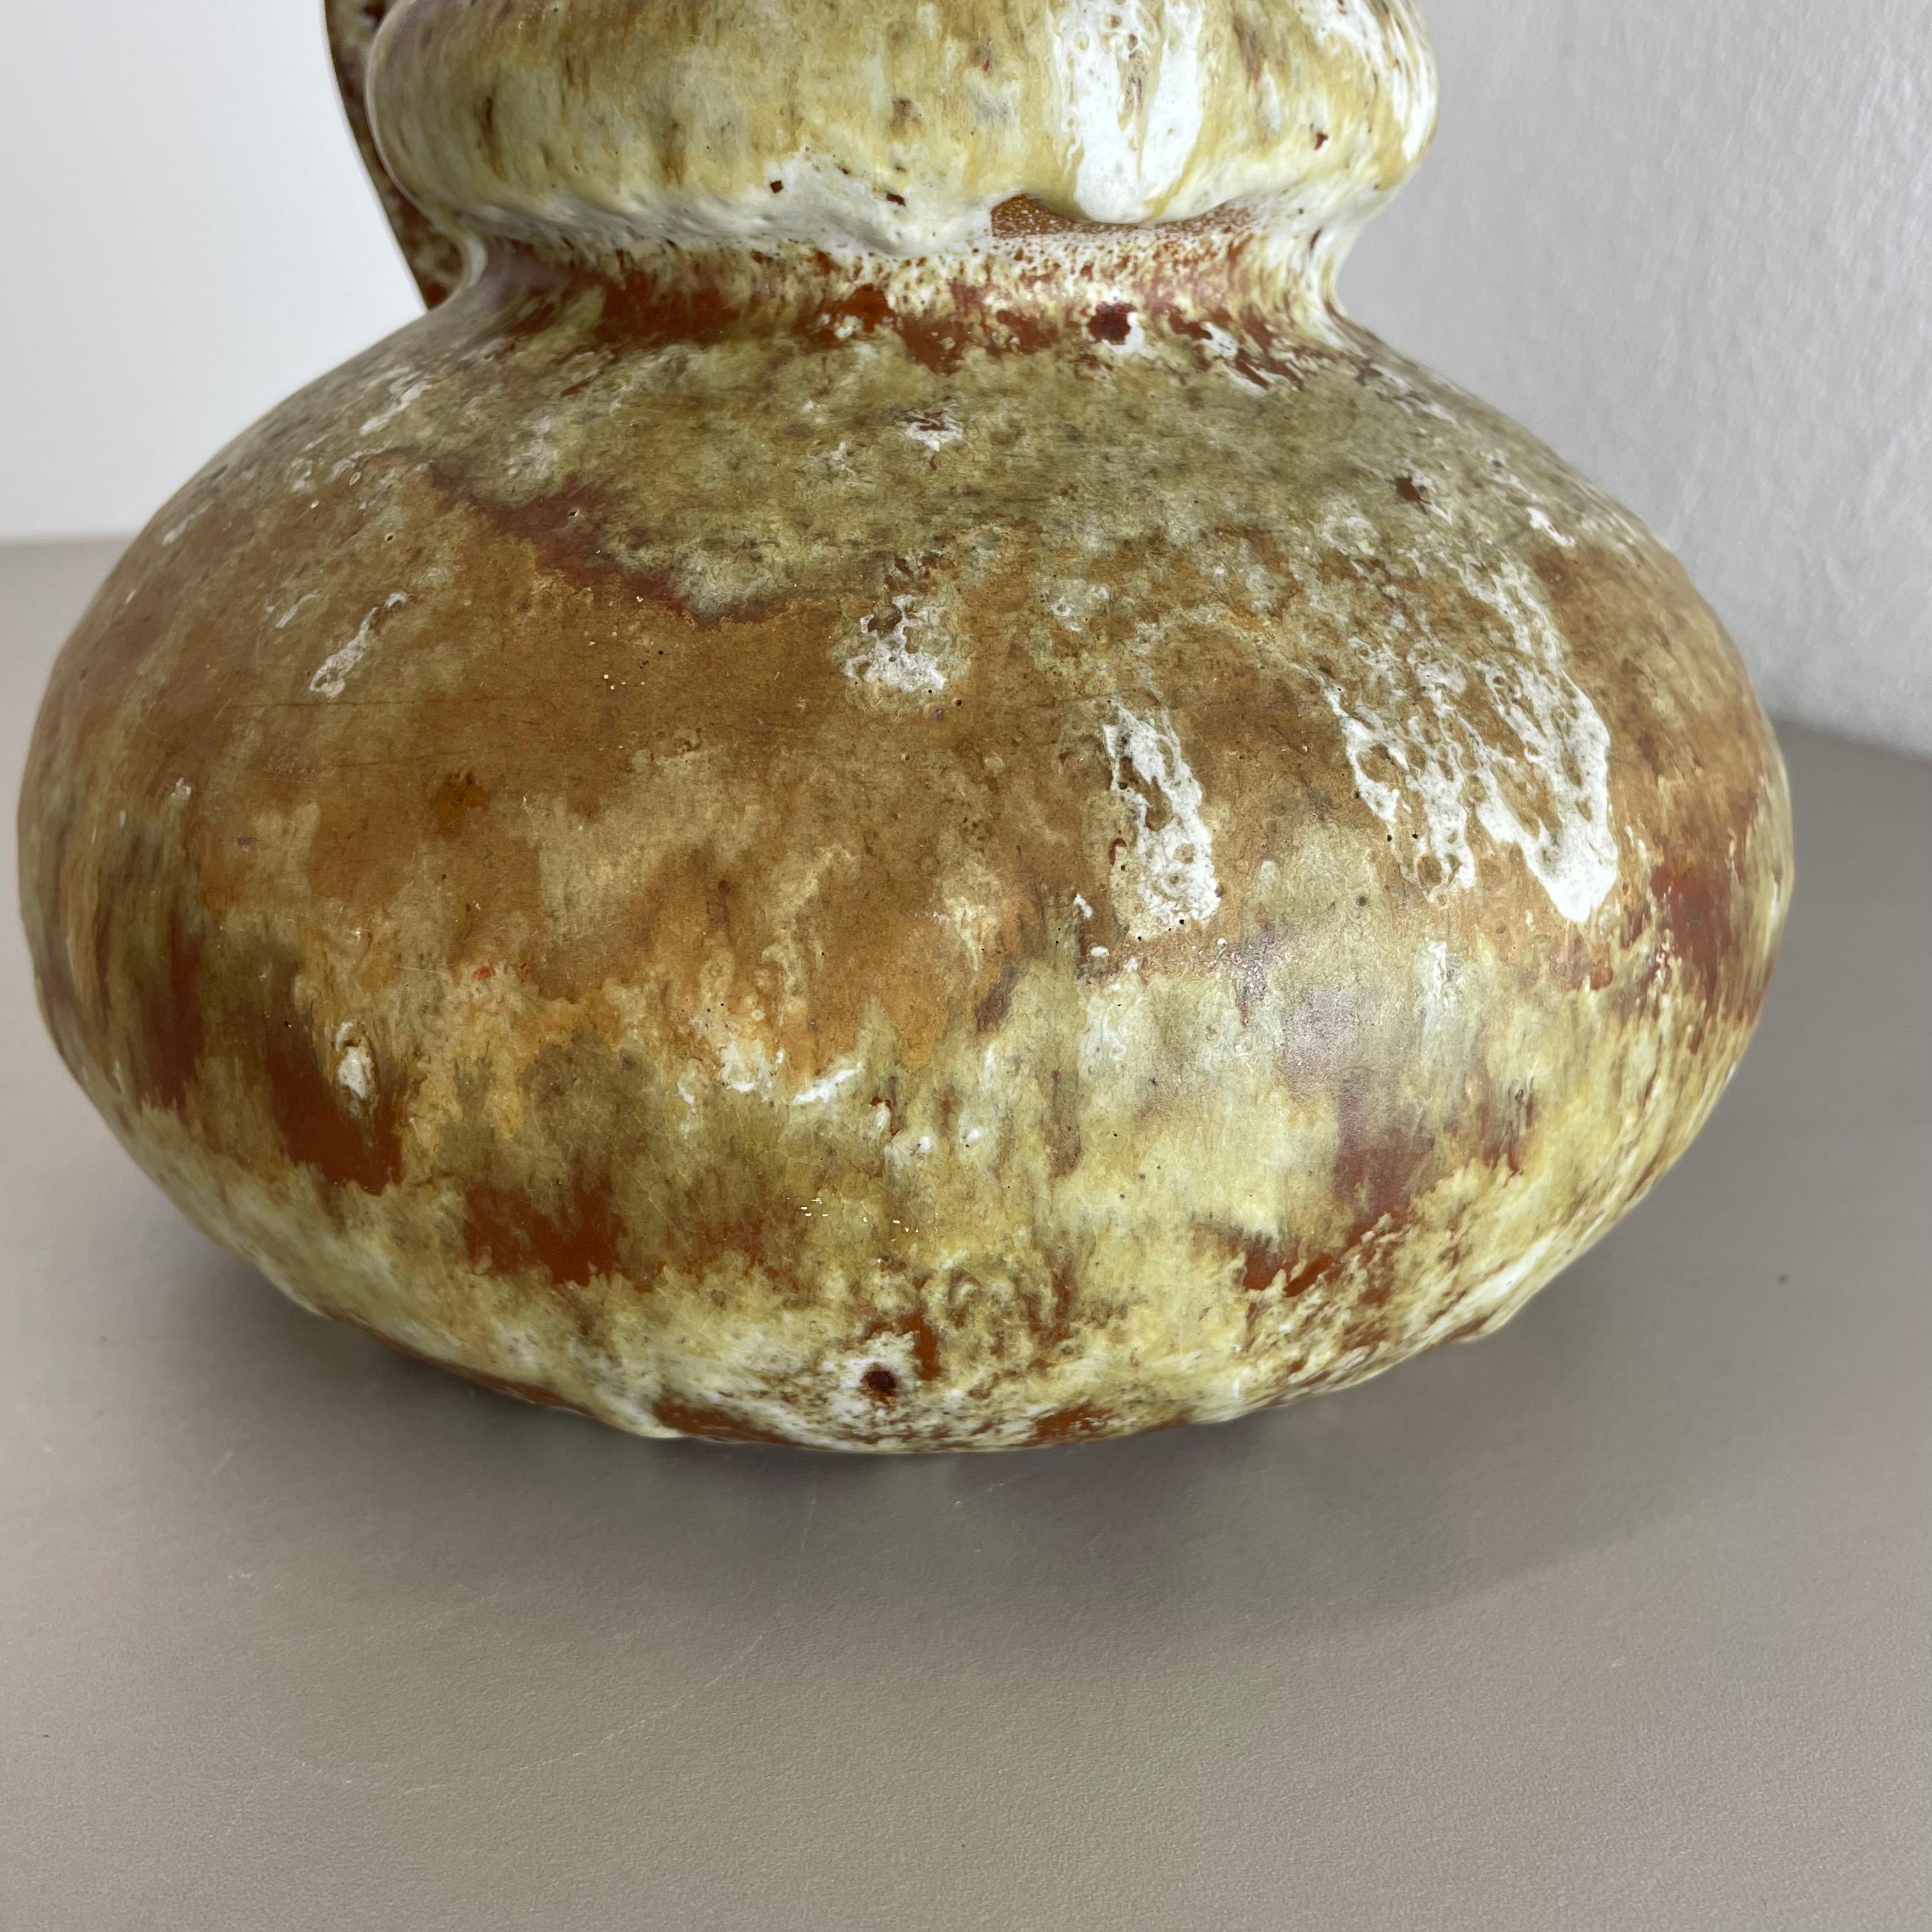 Brutalist WGP Pottery Fat Lava Multi-Color Vase Object by Ruscha, Germany, 1970s For Sale 7